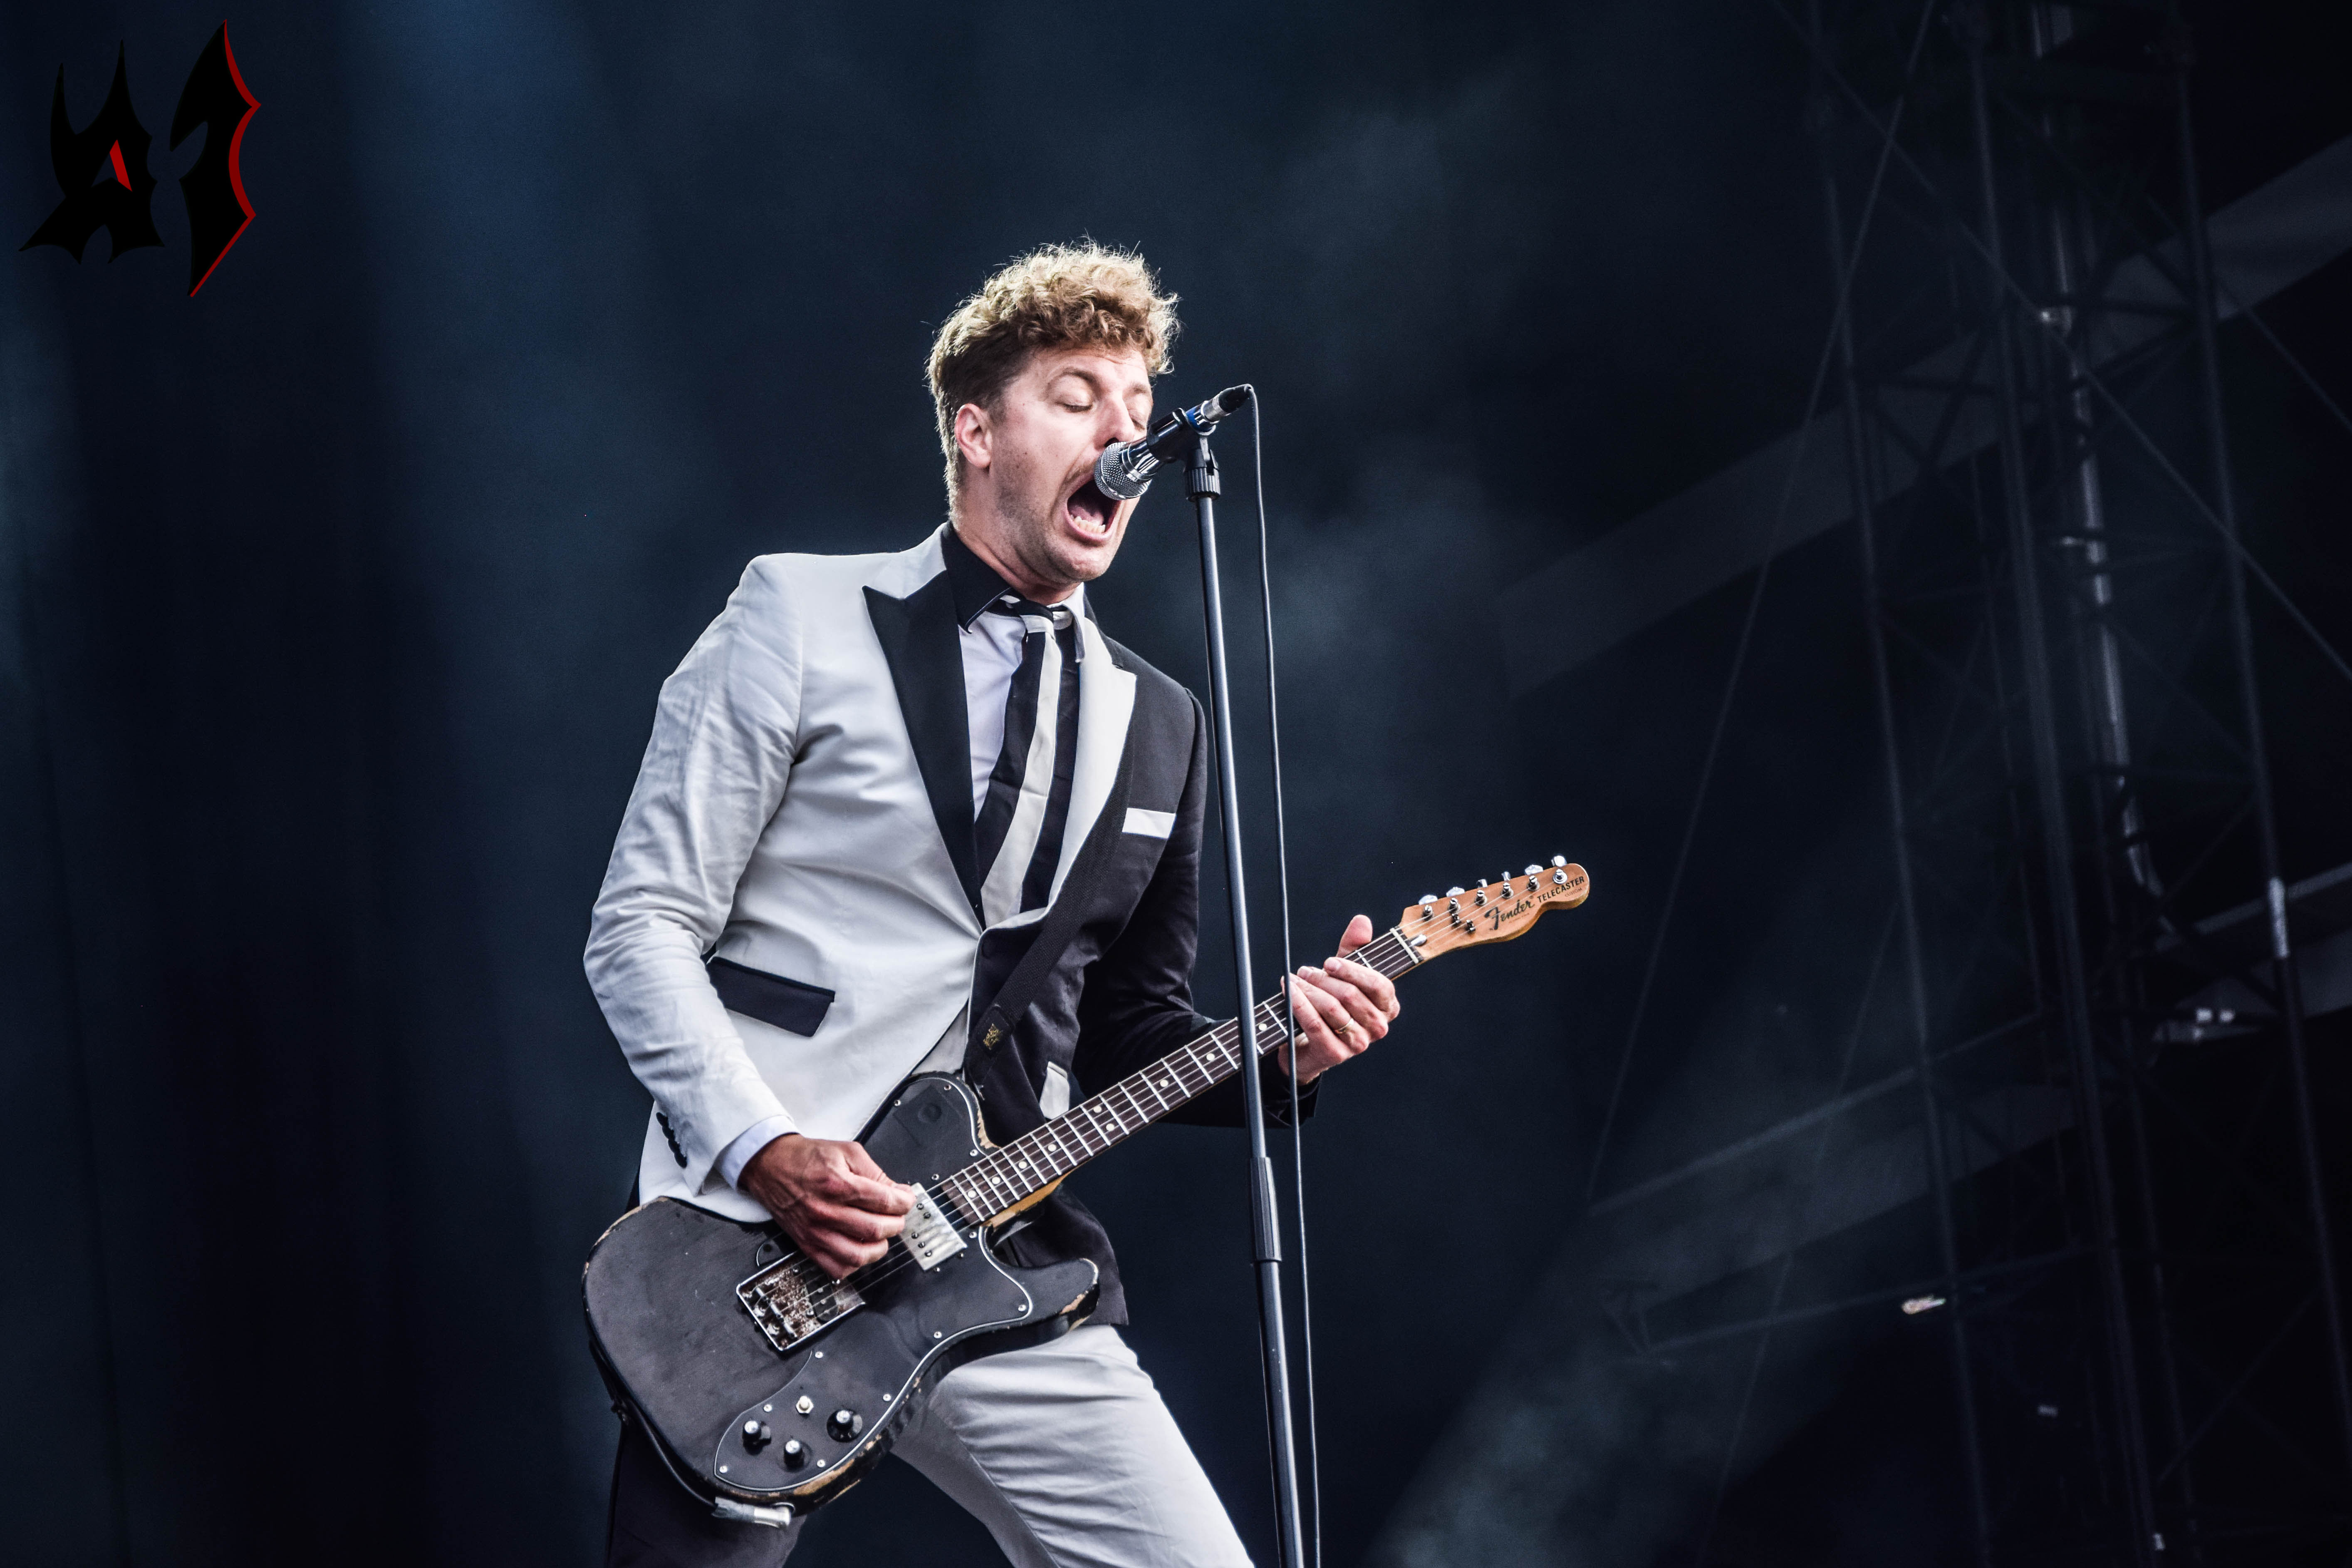 Donwload 2018 – Day 3 - The Hives 14